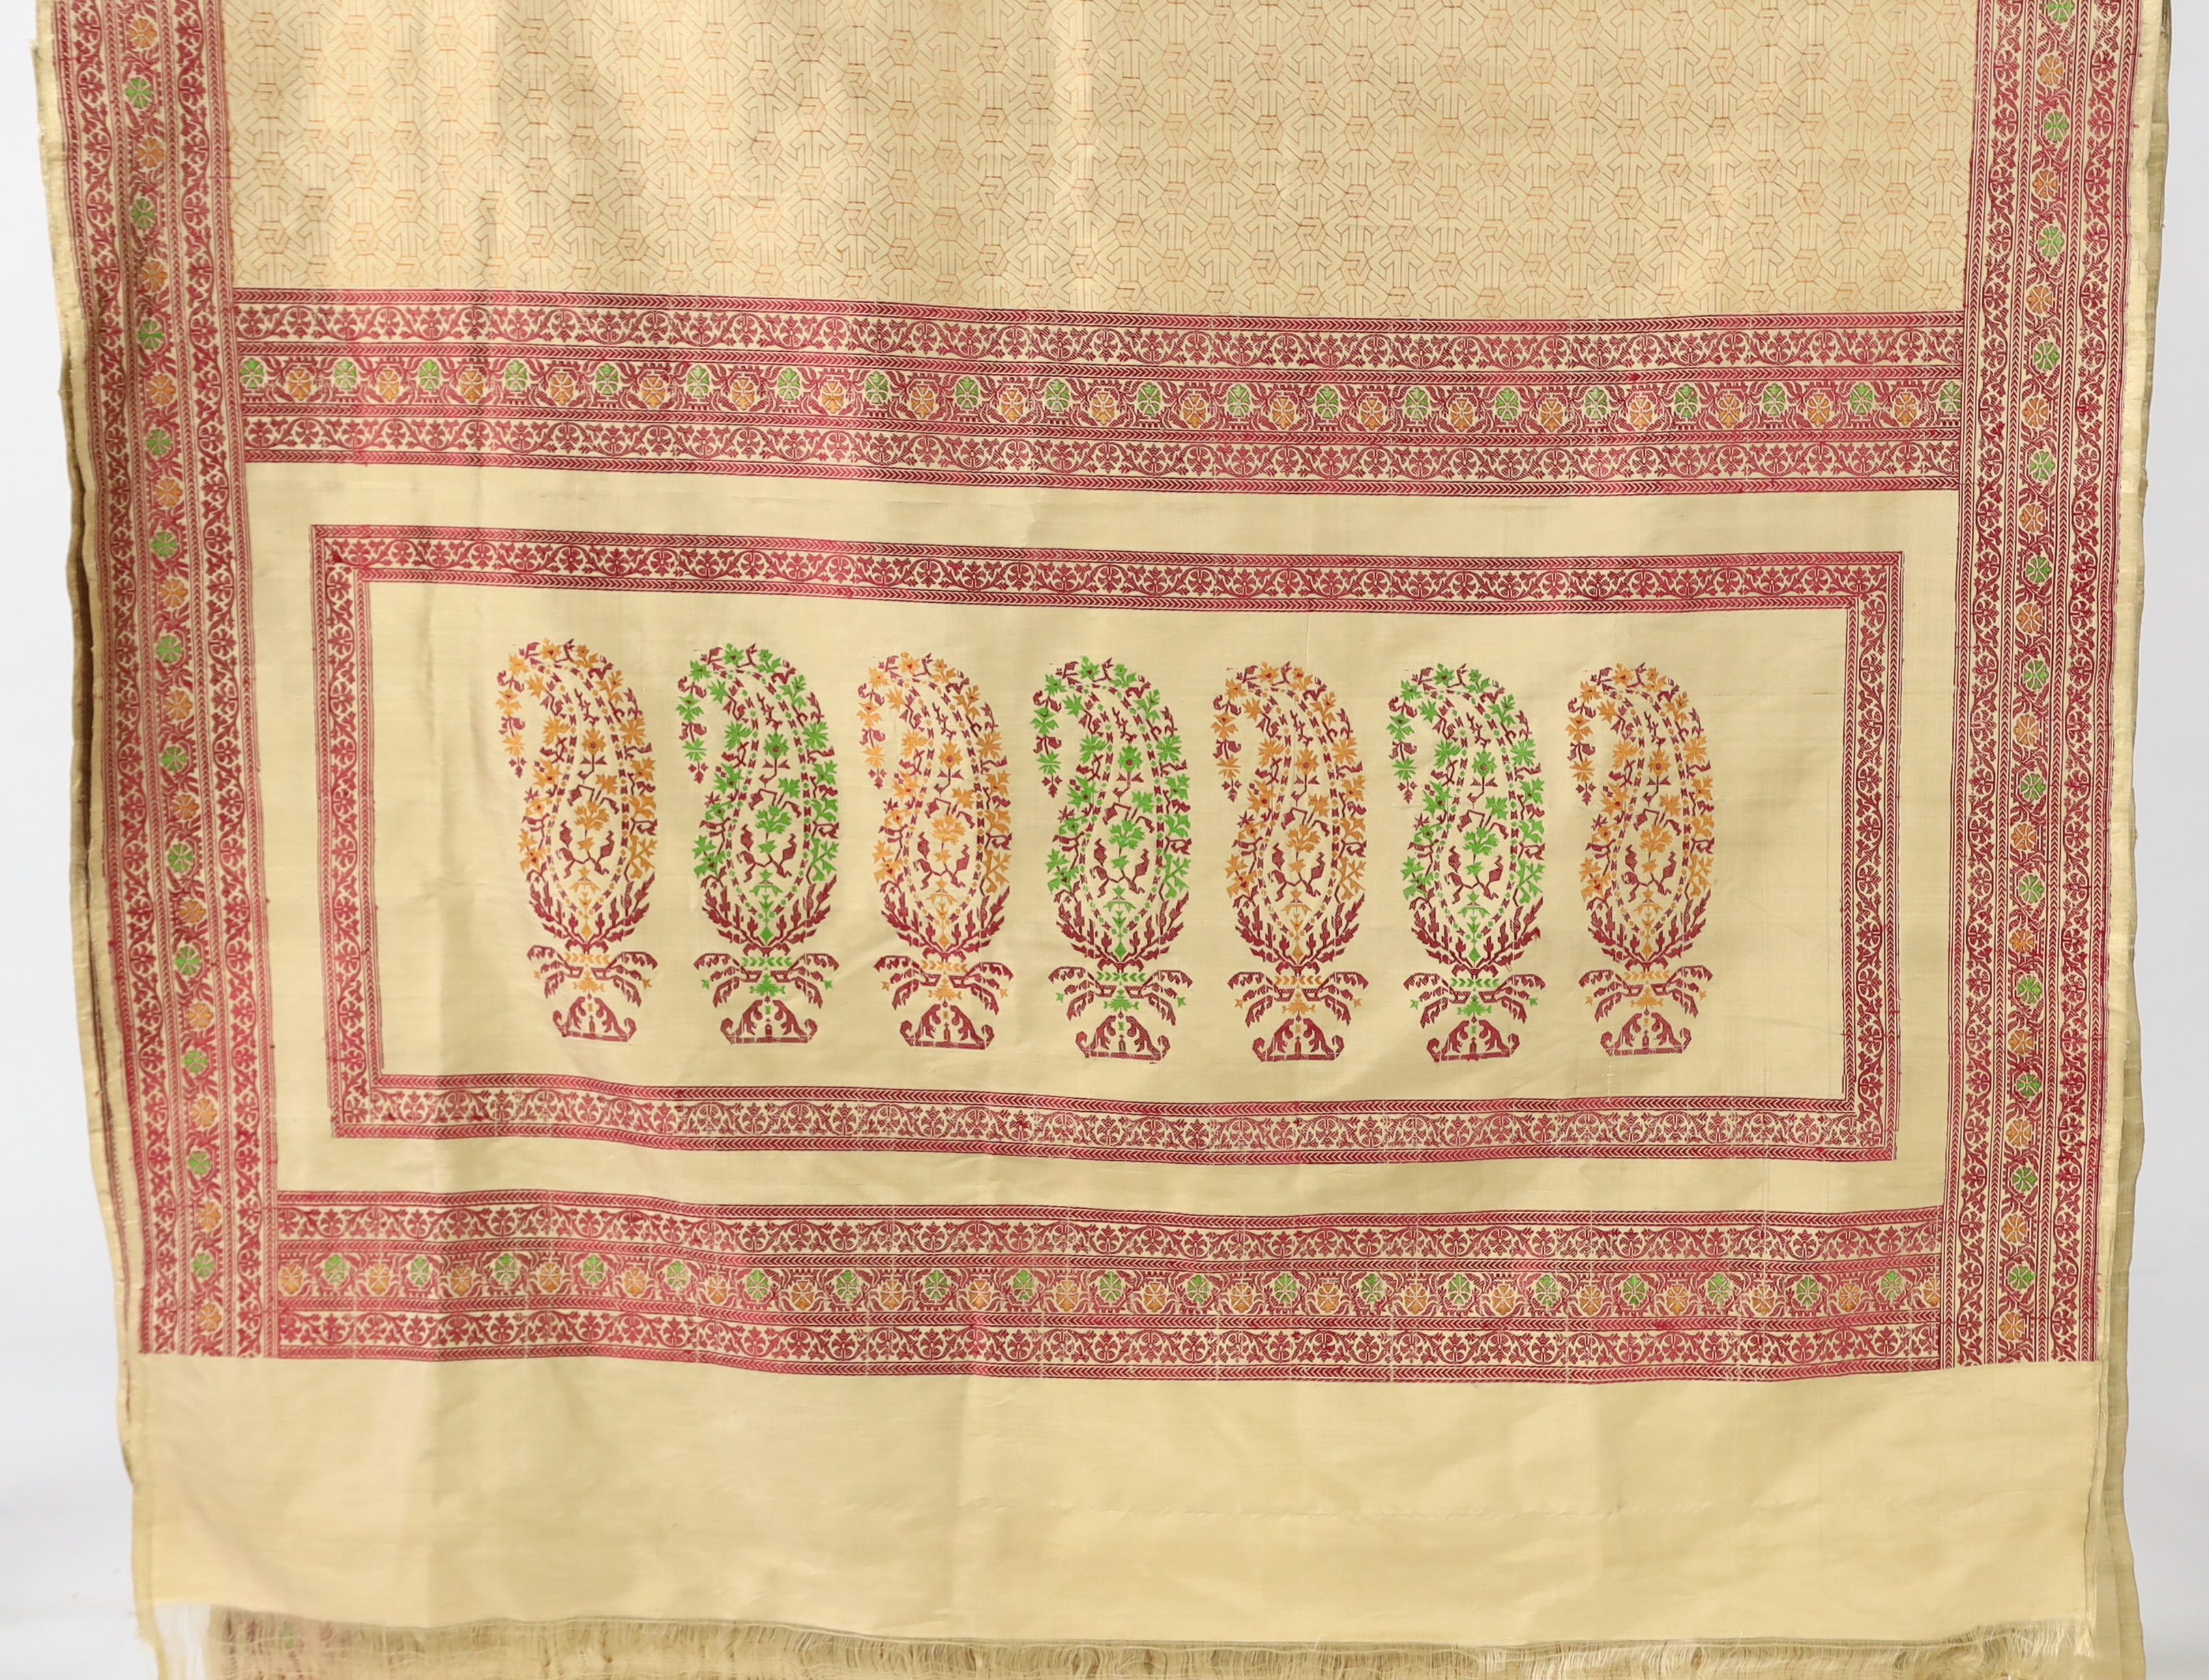 An Indian Varansi, 1980’s, hand woven silk sari by Mohammad Jafar Ali, woven in traditional style as a wedding sari, unused, 620cm long, 115cm wide, comes with provenance